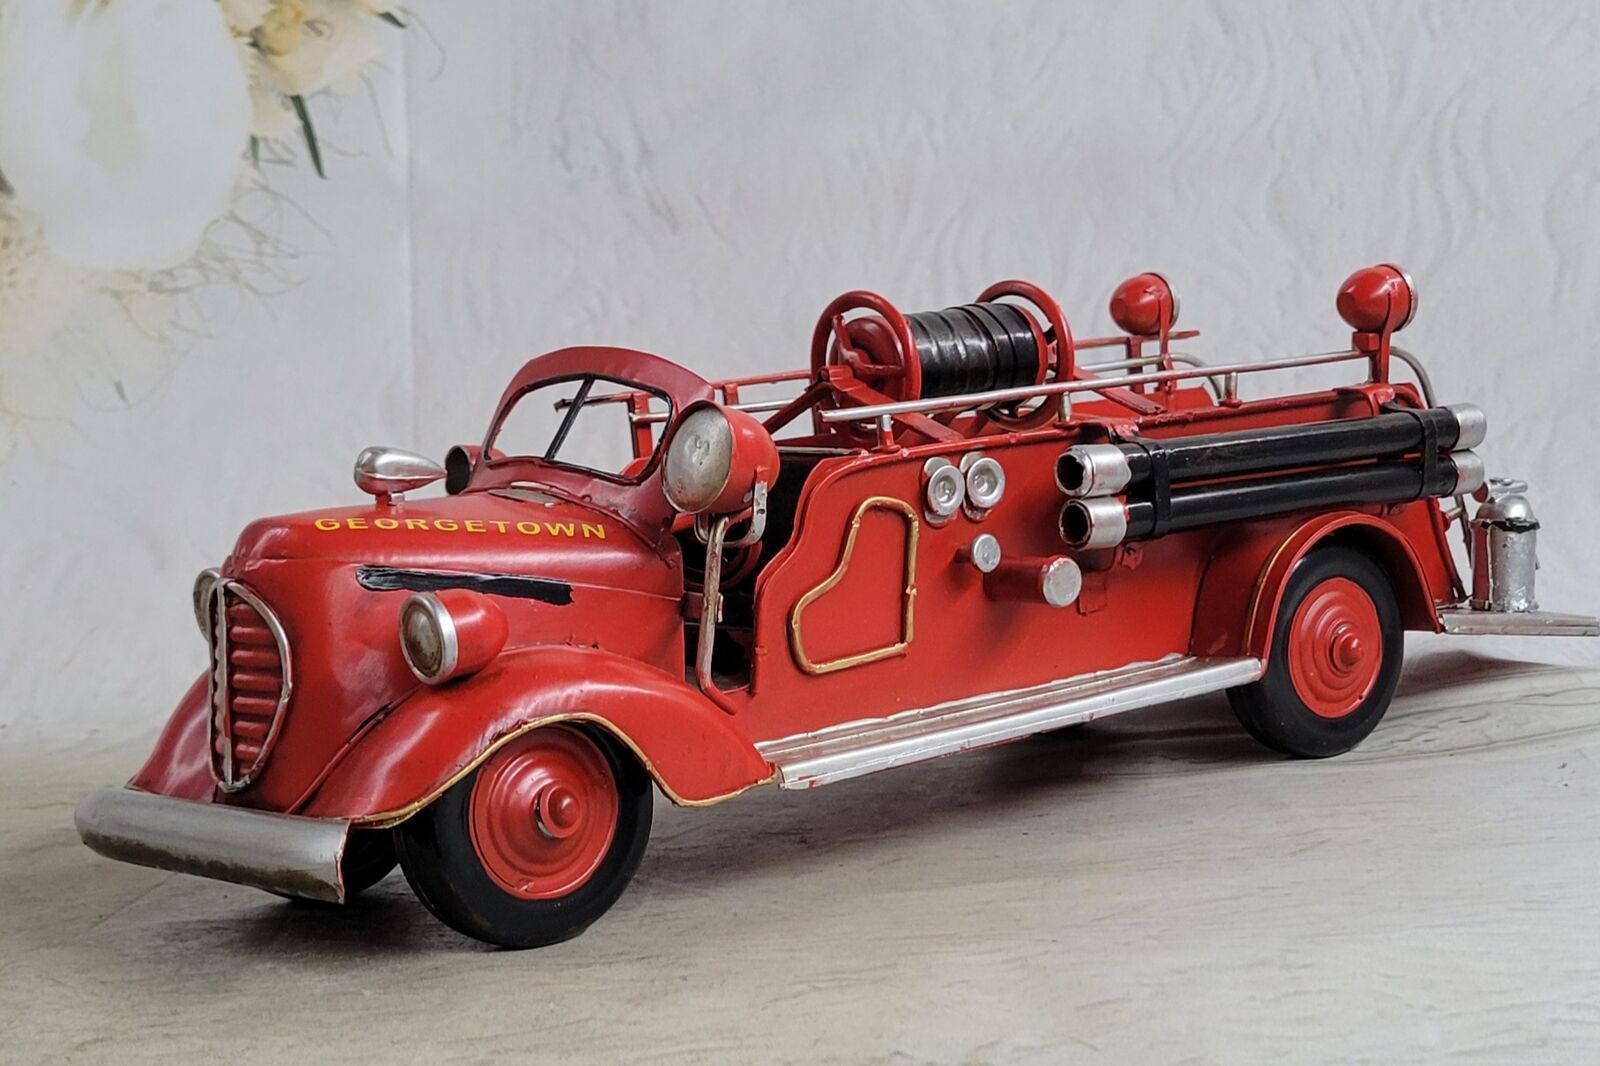 Antique Metal "georgetown" Fire Truck - Beautifully Detailed Engine Gift